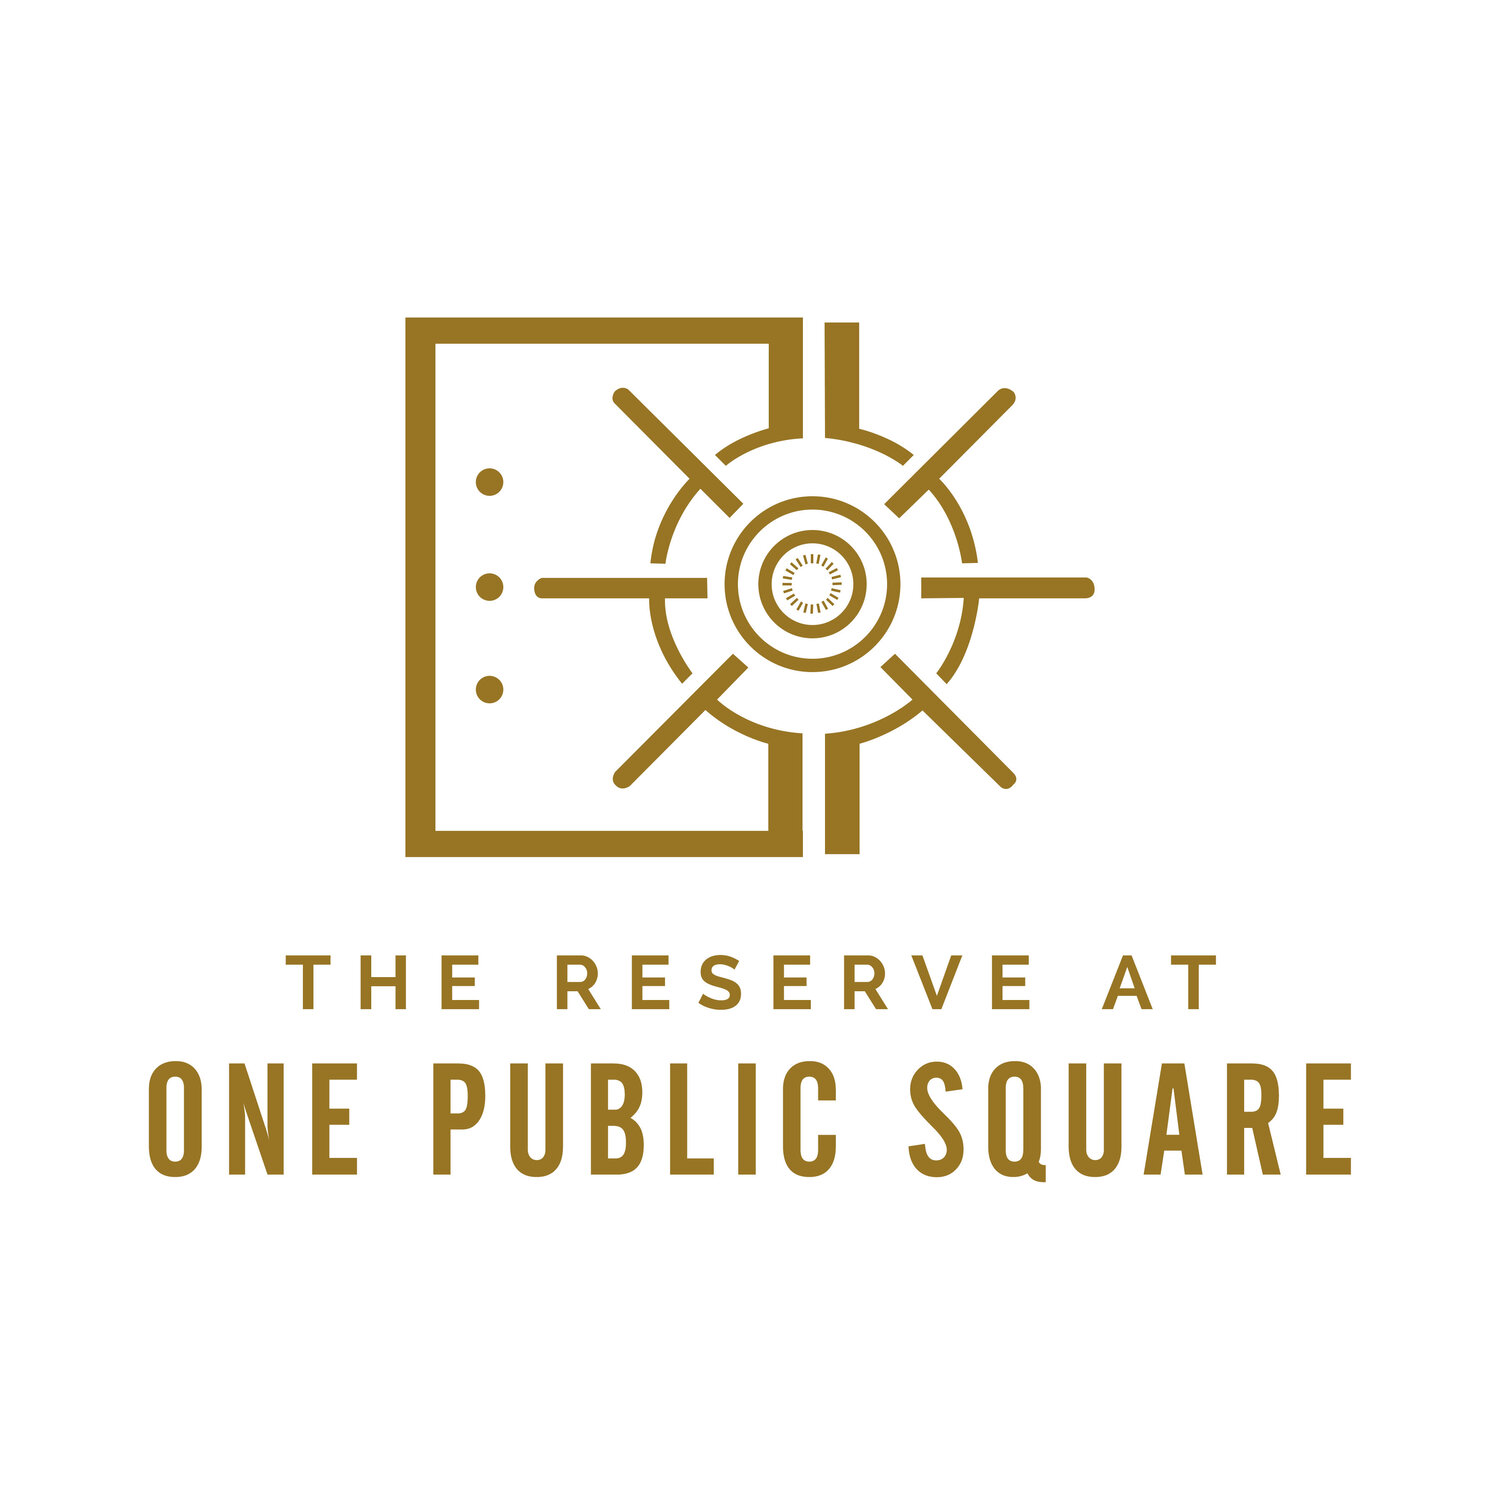 The Reserve at One Public Square